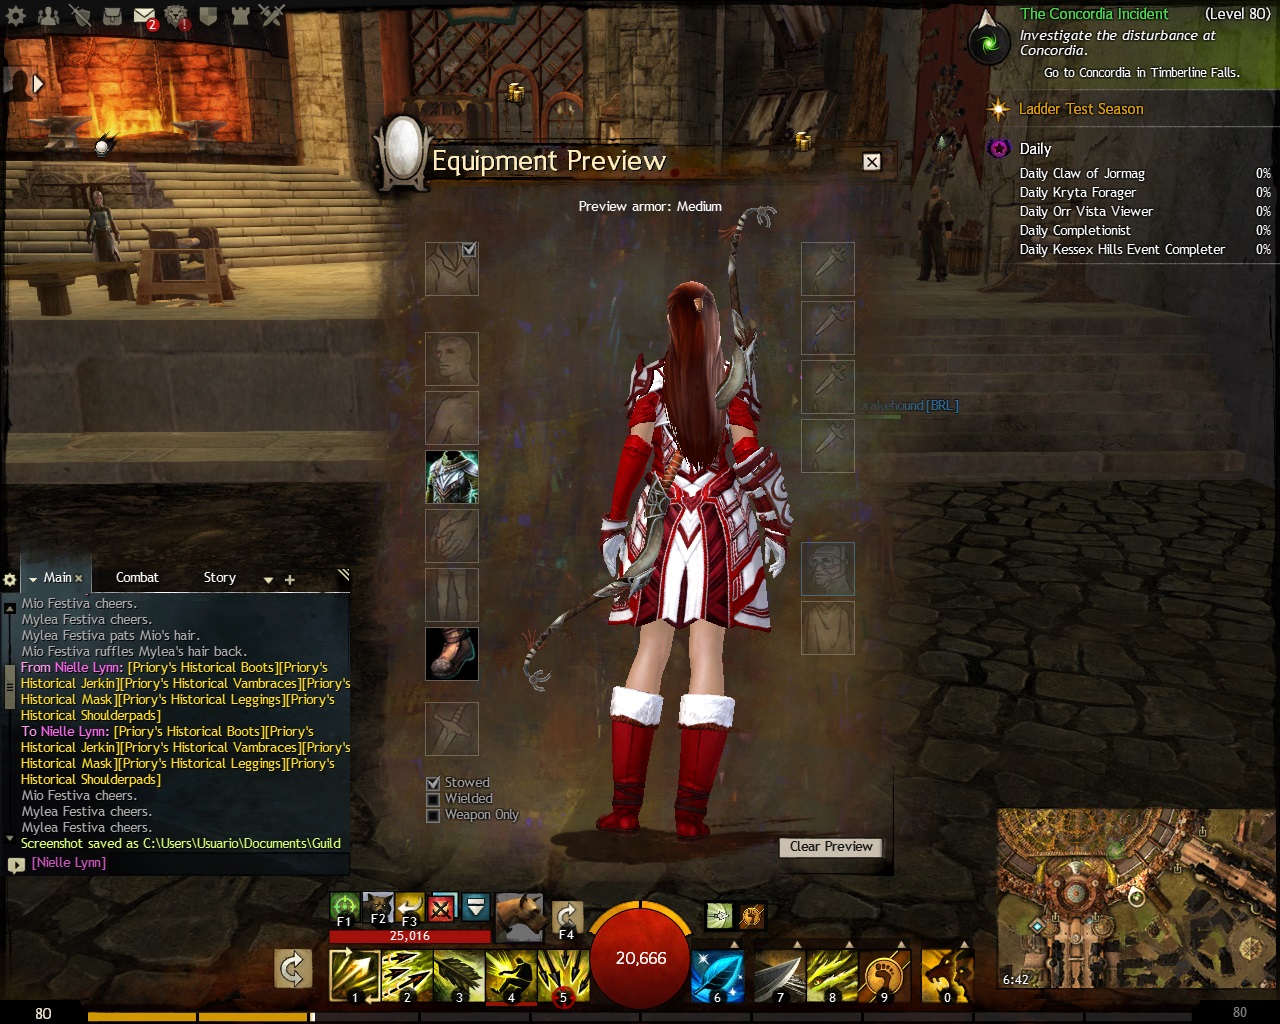 Guild Wars 2 - Priorys Historical Jerkin with Seeker Boots - 02